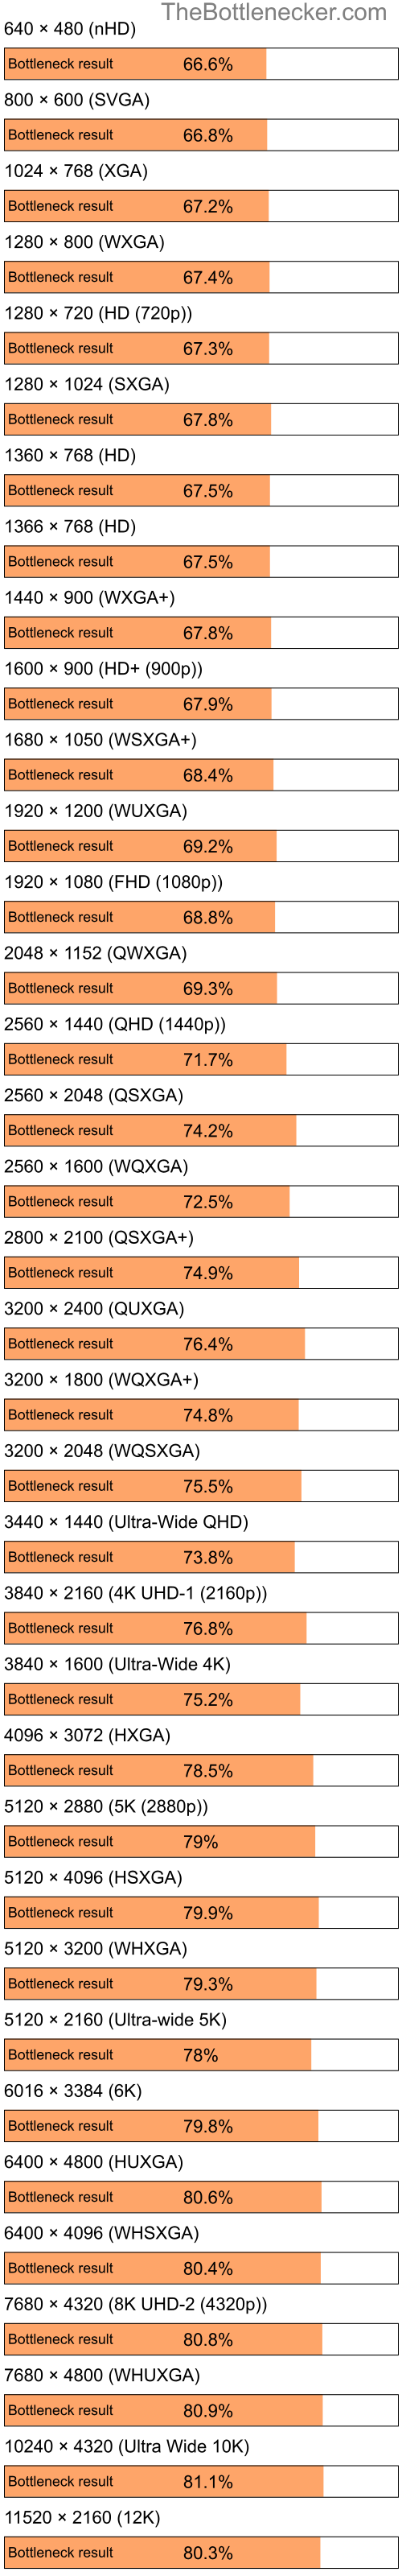 Bottleneck results by resolution for Intel Pentium 4 and AMD Radeon 2100 in General Tasks